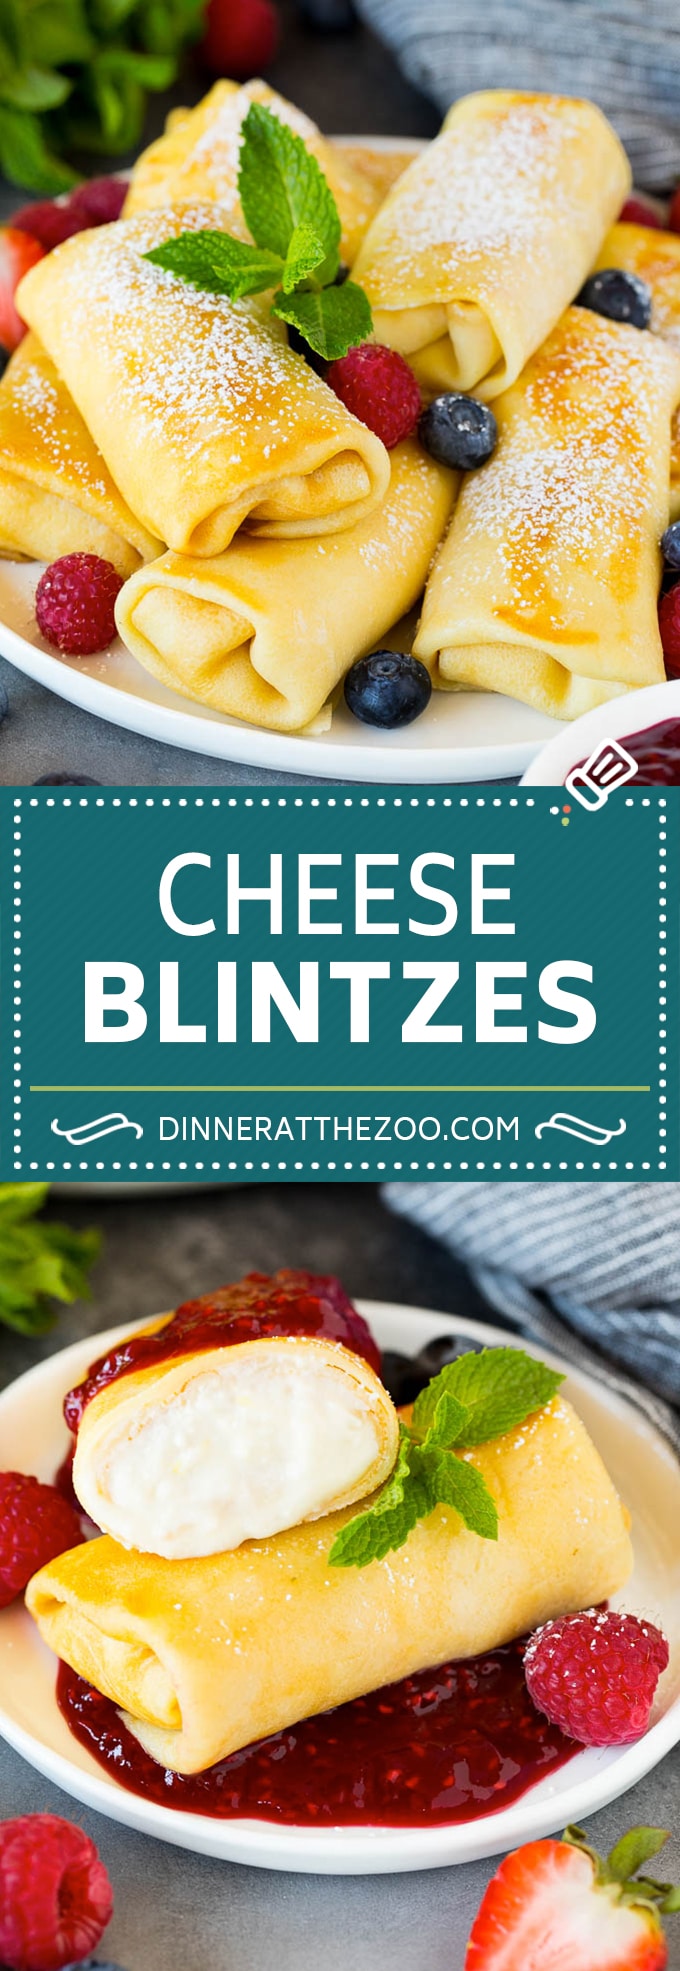 These cheese blintzes are thin pancakes filled with a creamy cheese mixture, then pan fried until golden brown.